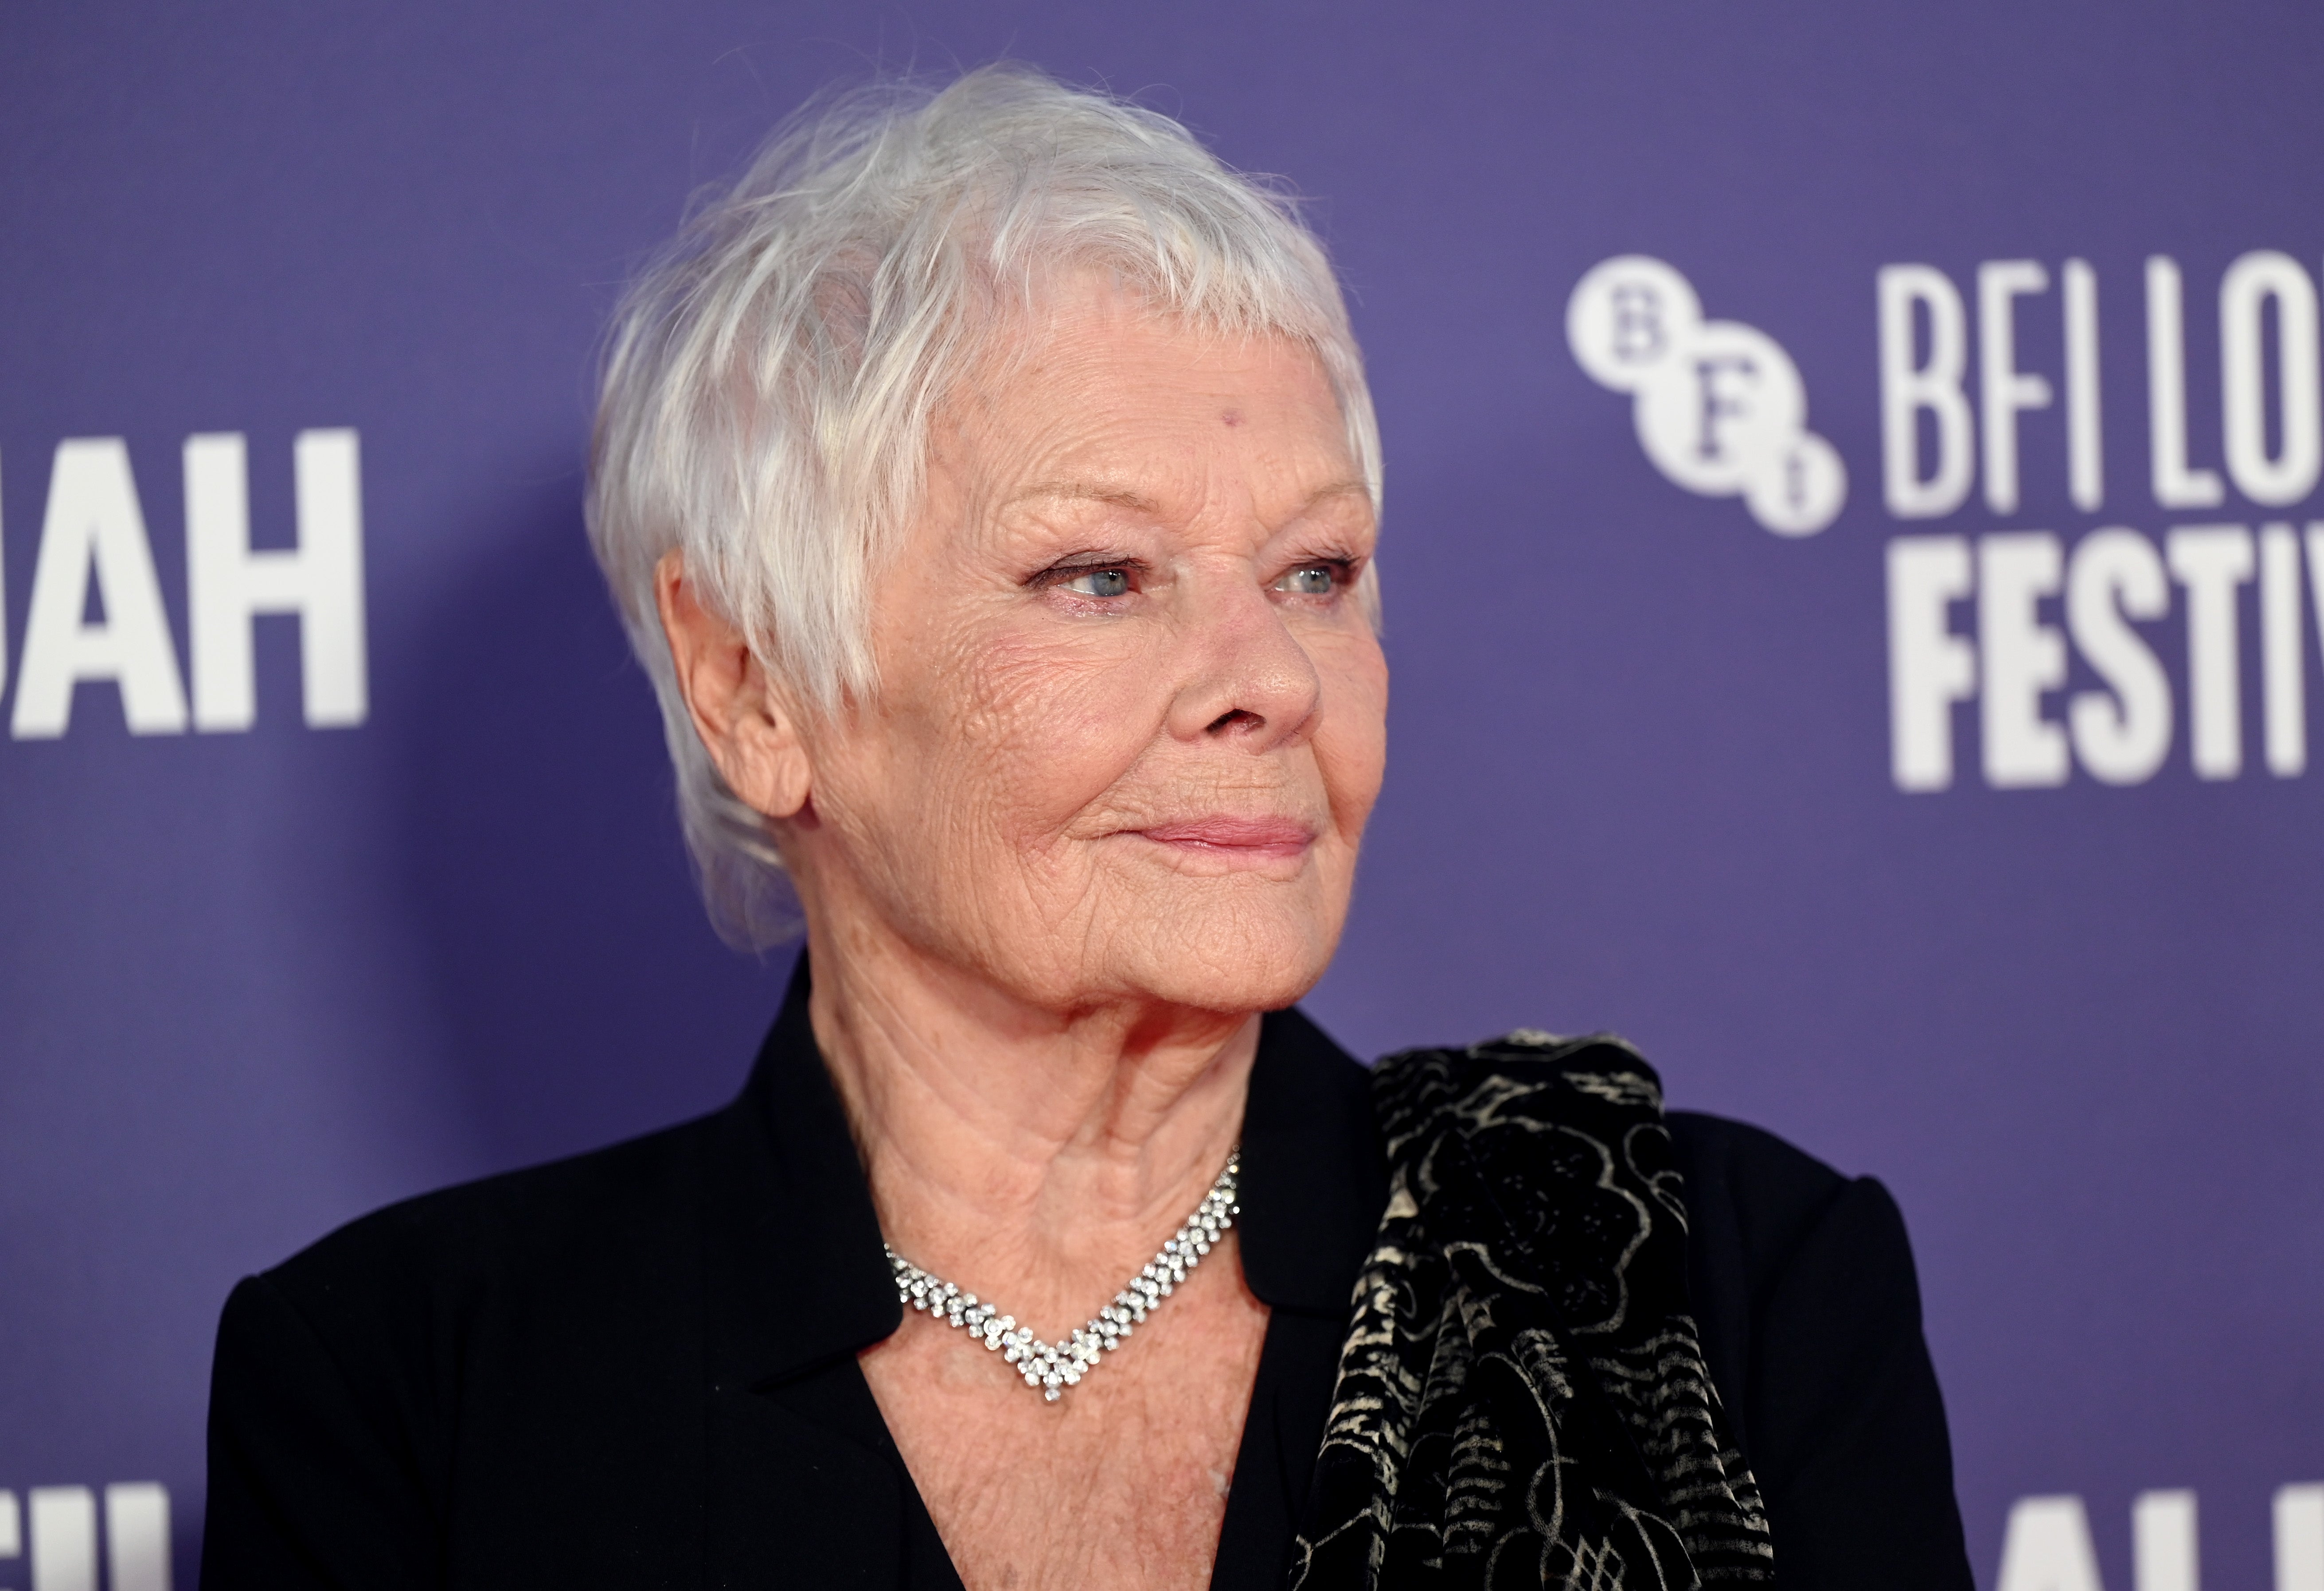 Judi Dench attends the ‘Allelujah’ European Premiere during the 66th BFI London Film Festival at Southbank Centre in London on 9 October 2022